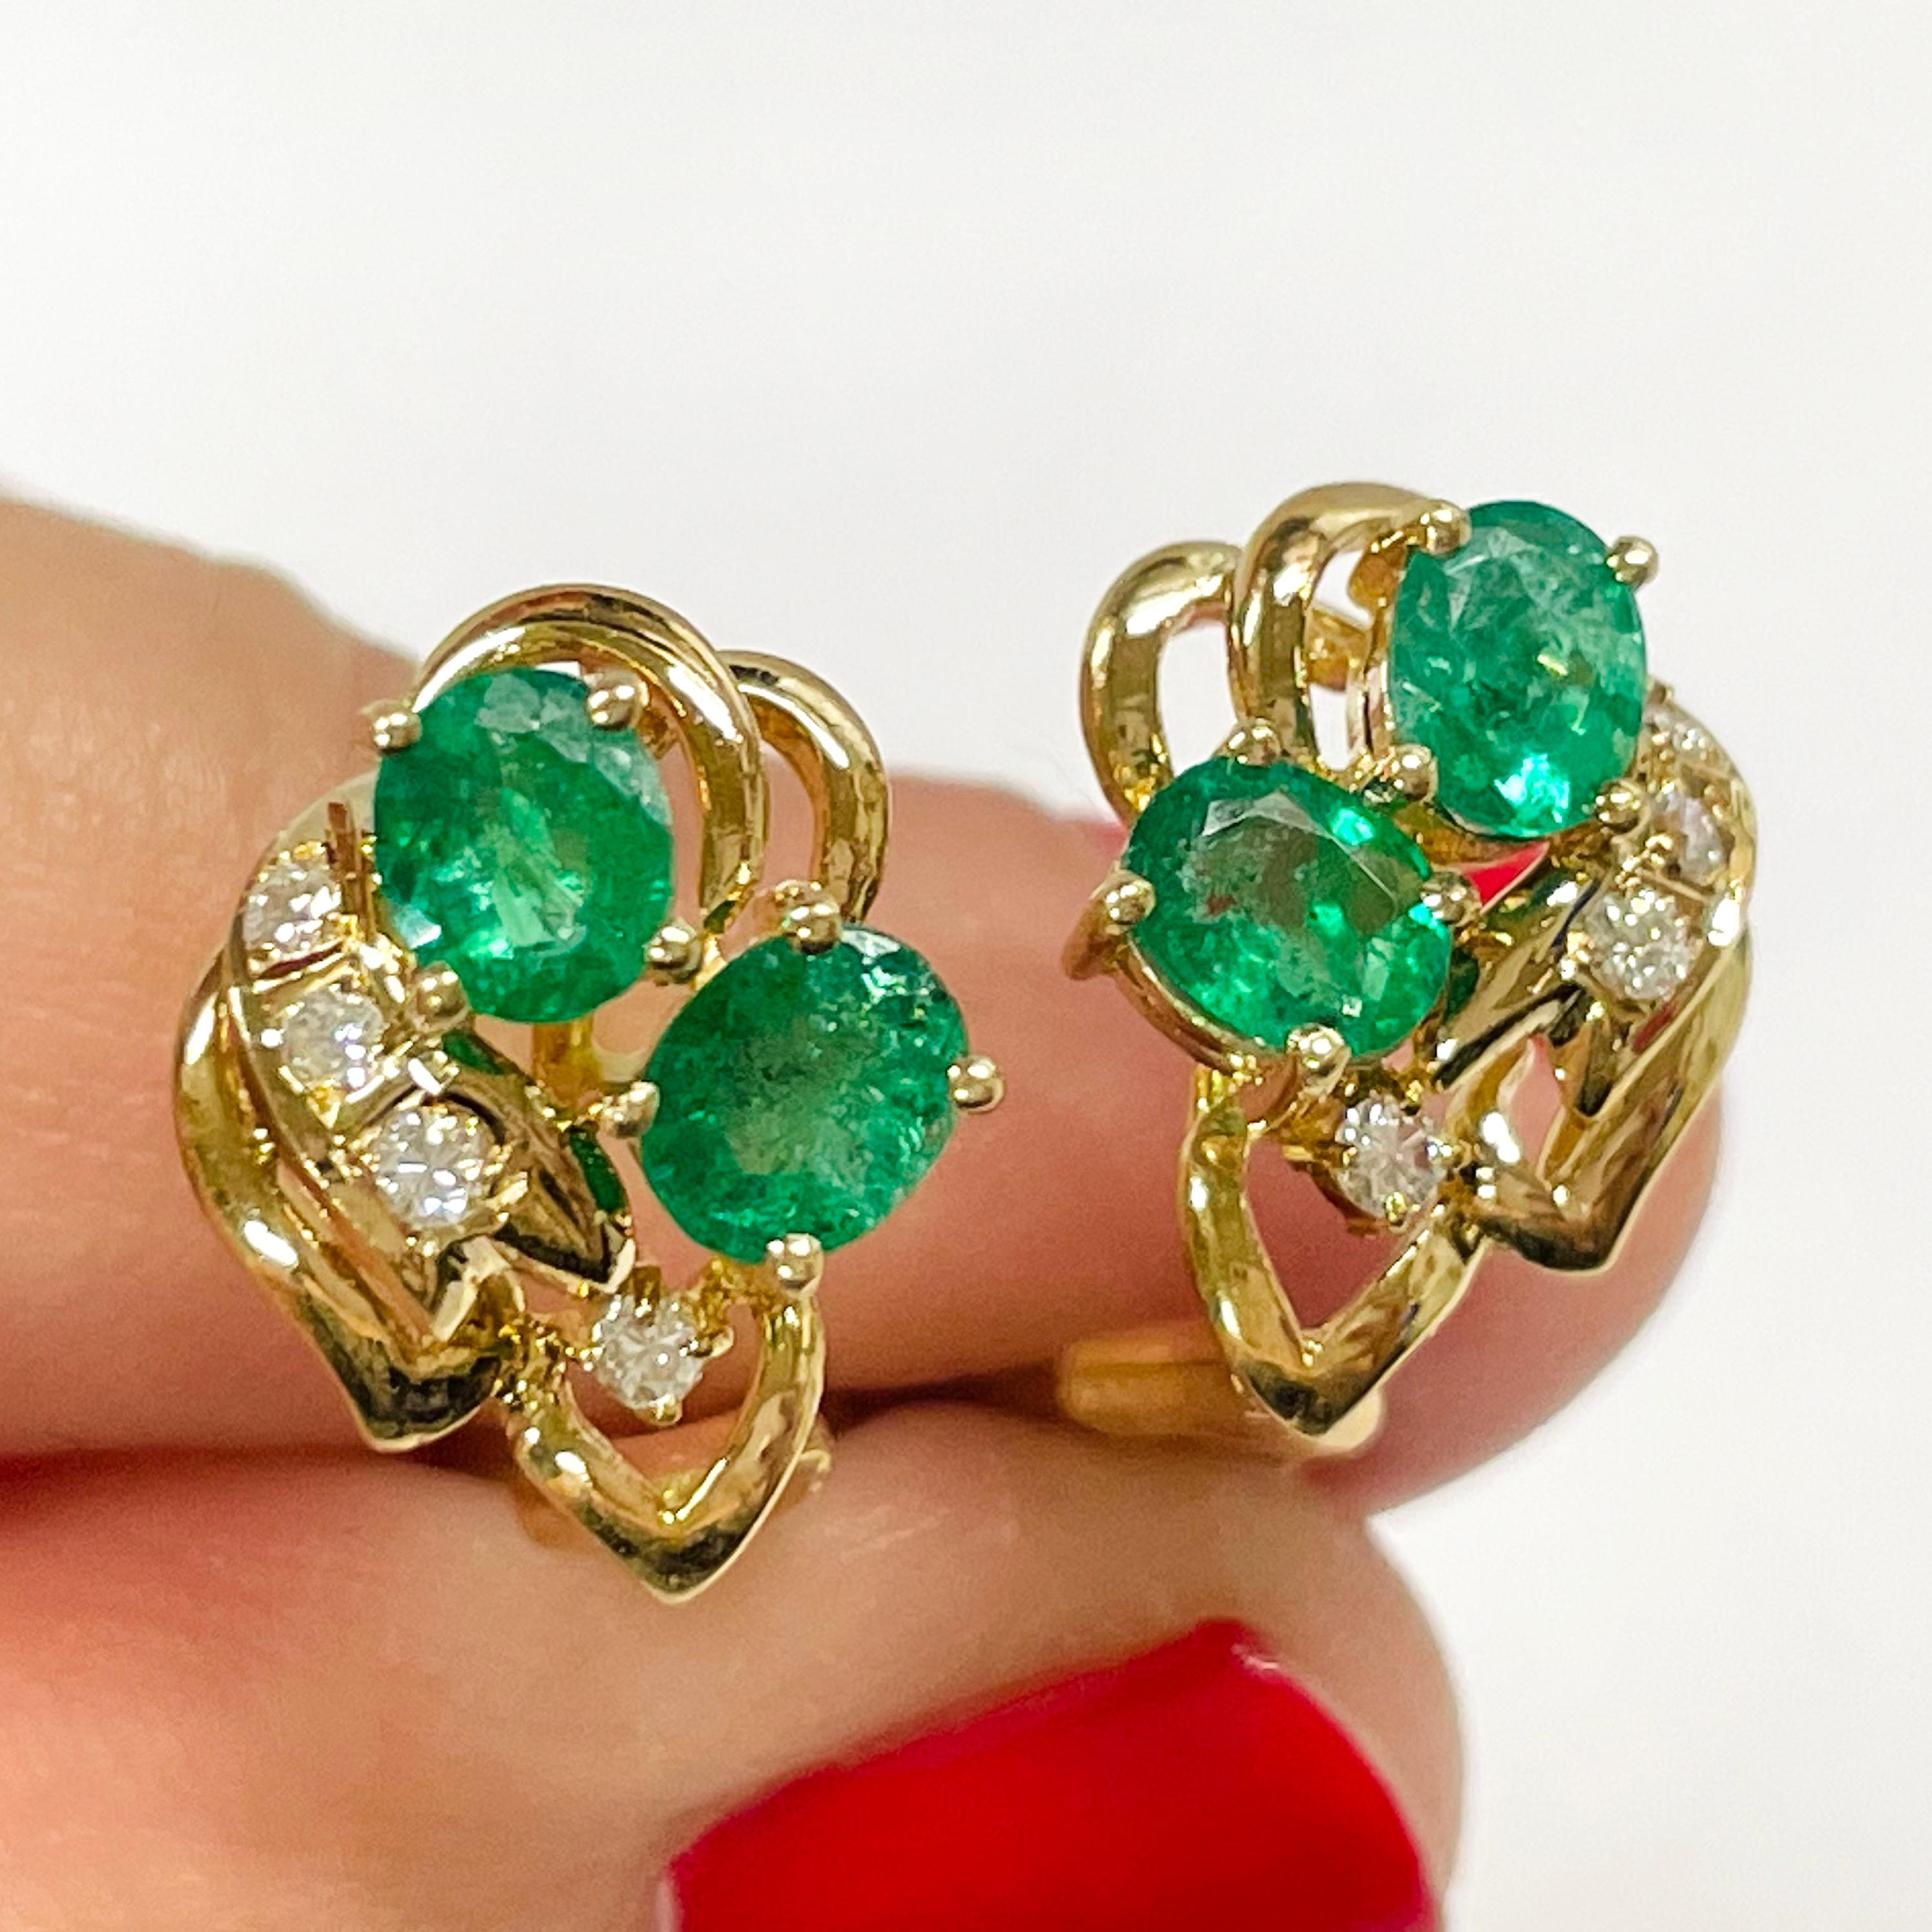 14 Karat Yellow Gold Emerald Diamond Earrings. Each earring features two basket set oval emeralds and four round diamonds. The four emeralds measure 5 x 4mm for a carat total weight of 1.50ctw. The earrings have a post and an omega clip. The